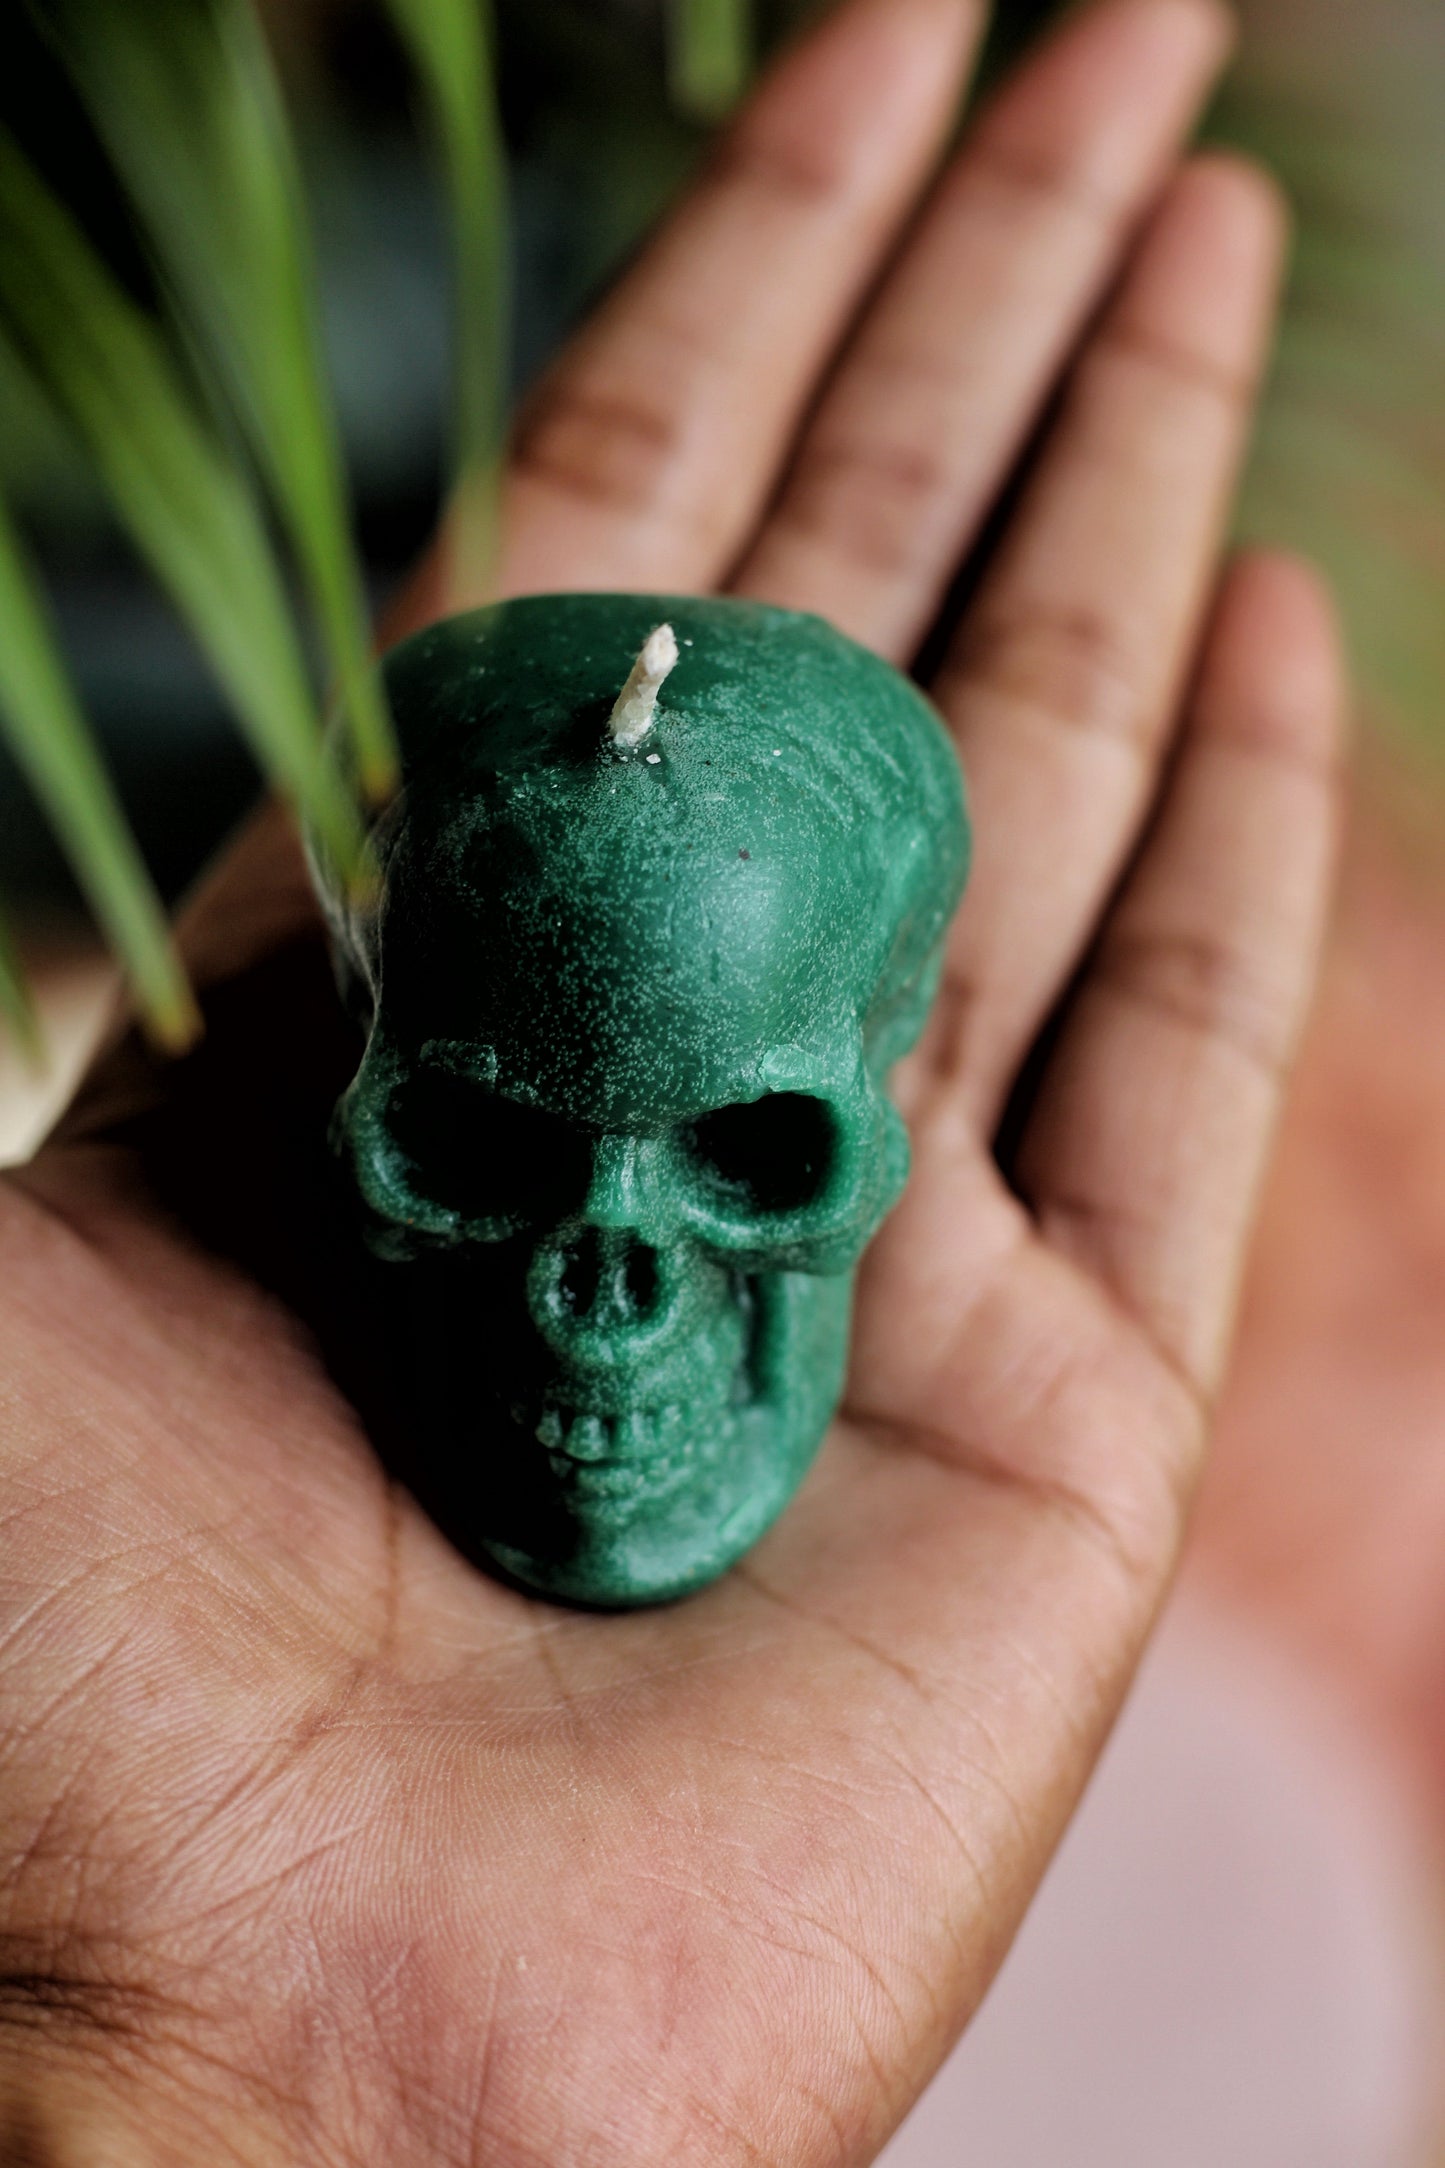 Green Skull Candle